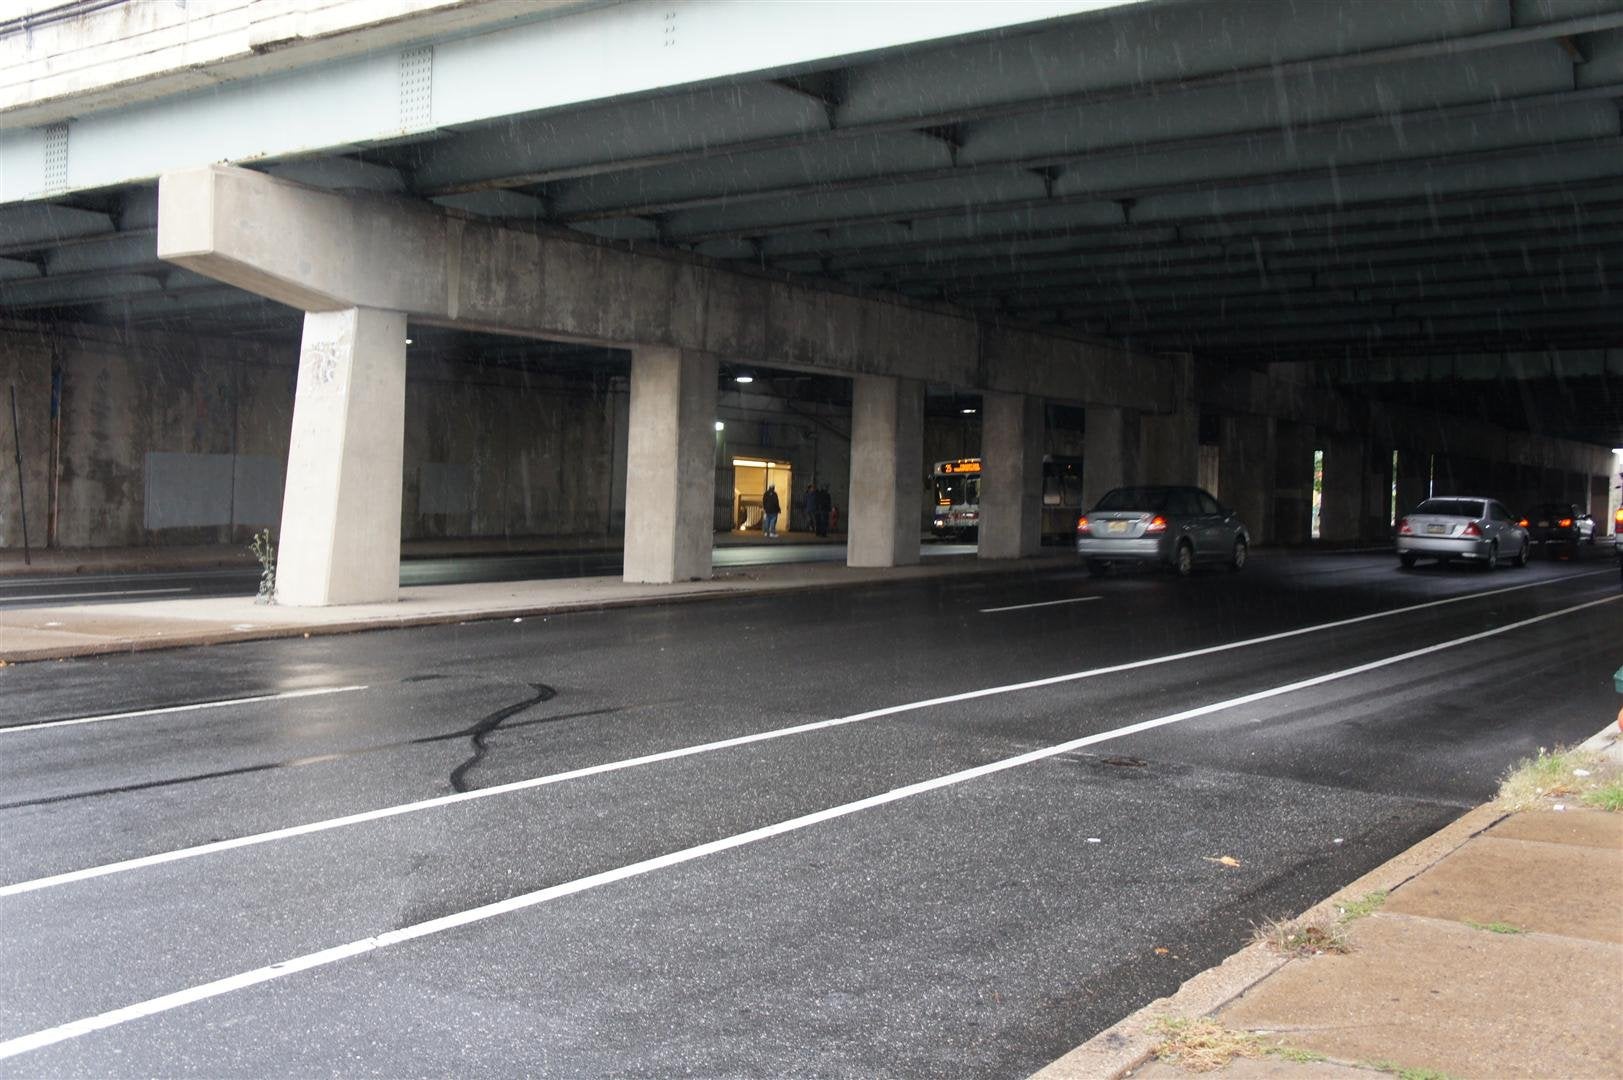 Current Spring Garden Underpass conditions. Photo courtesy DRWC